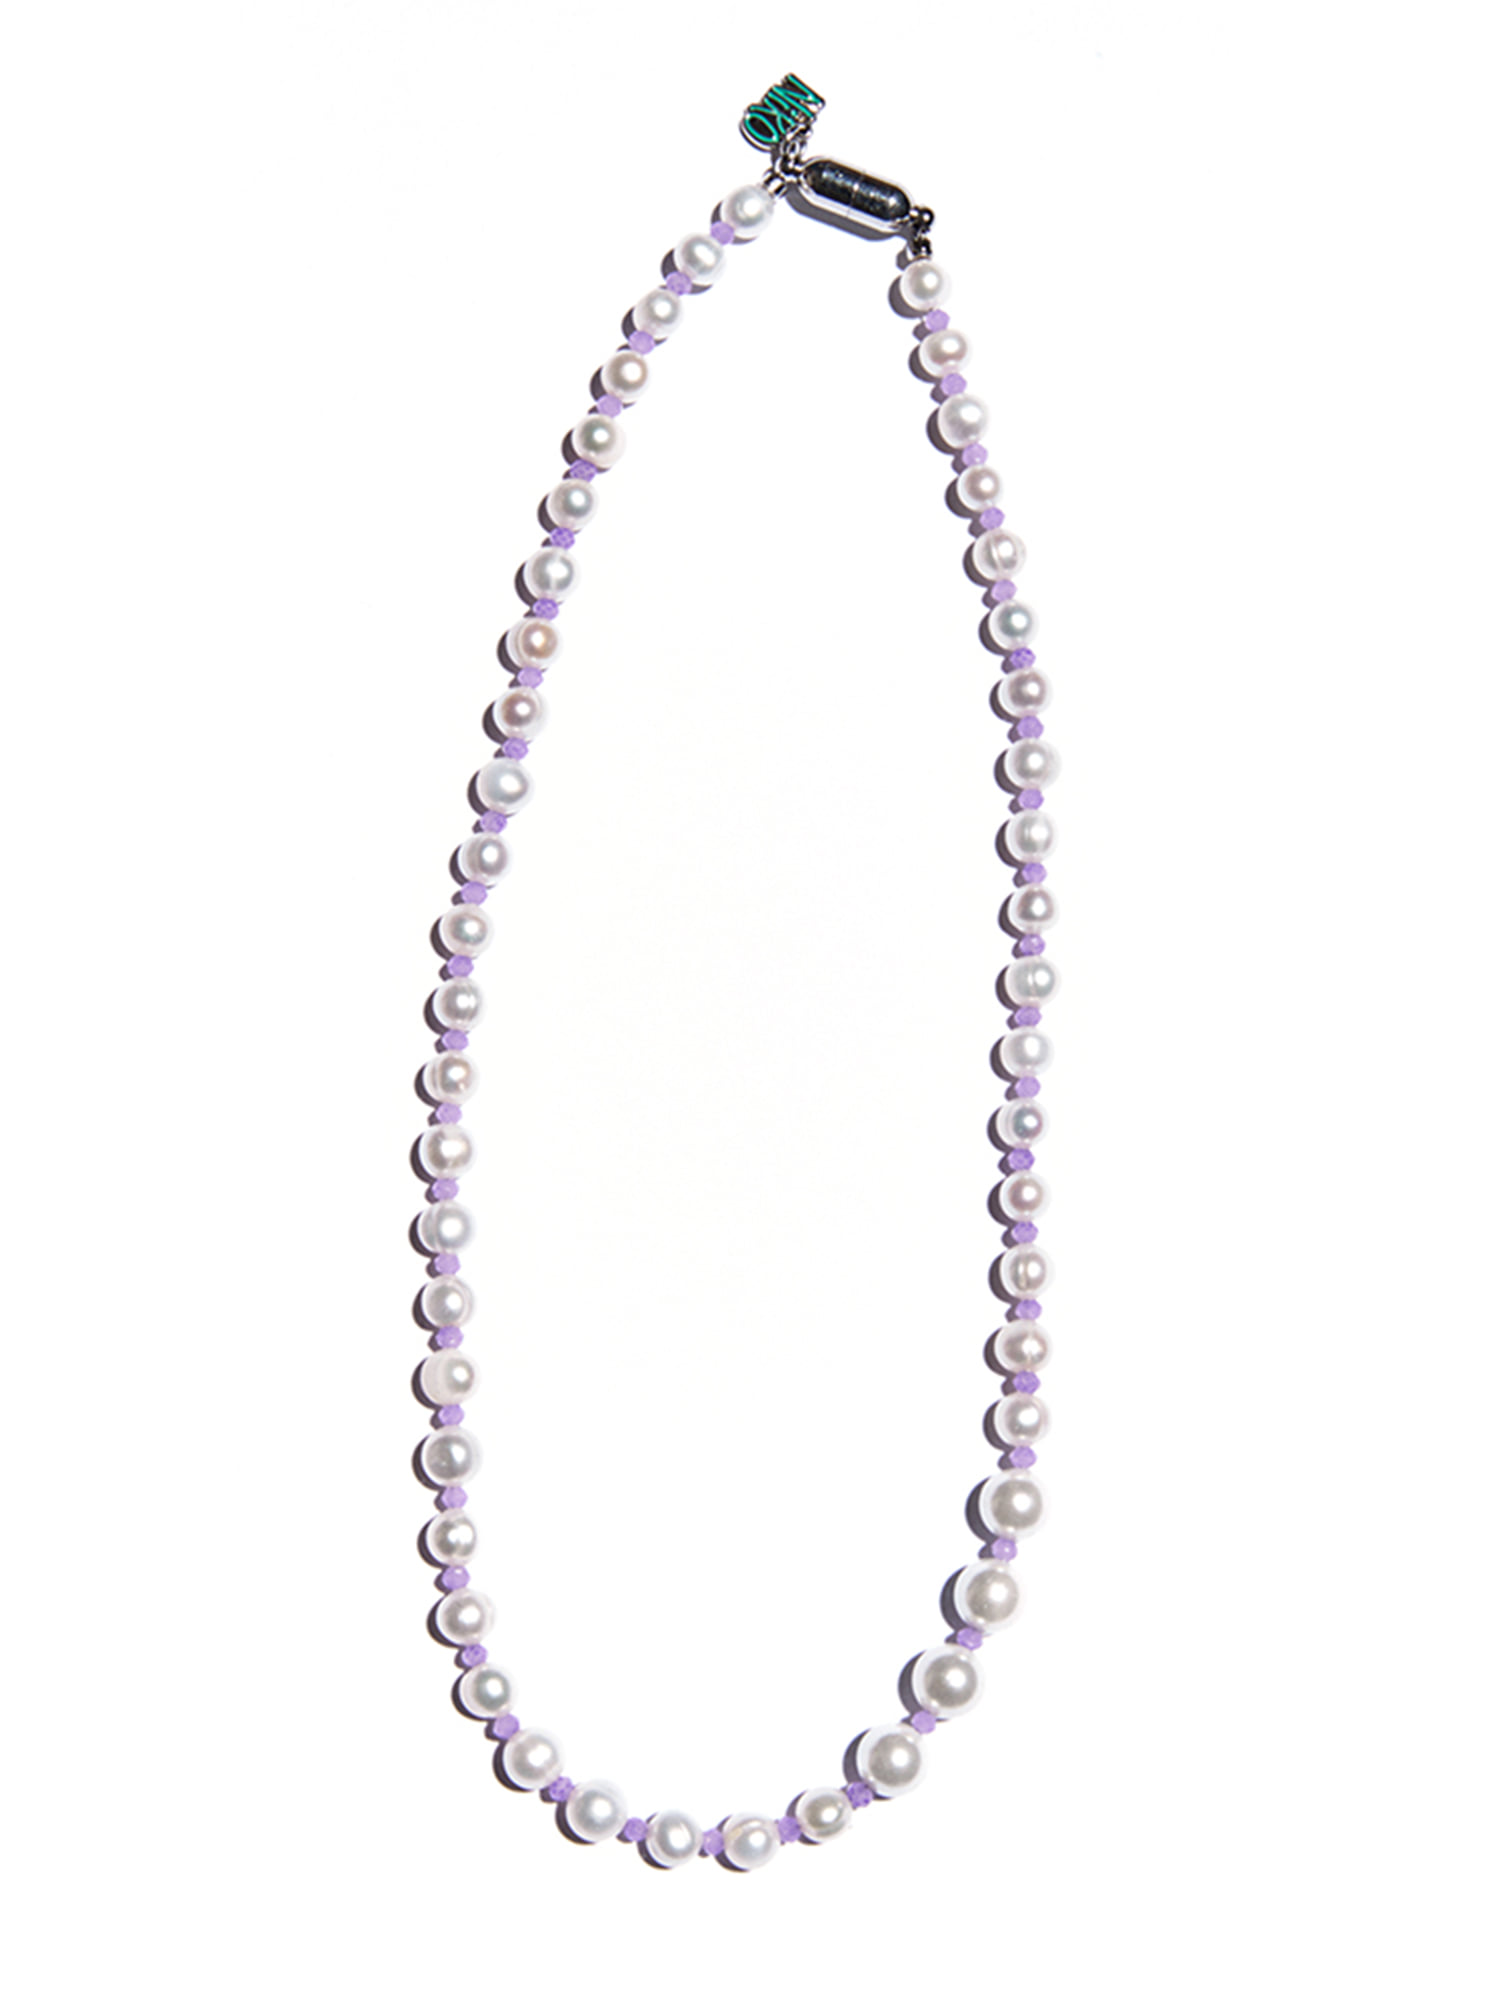 Purple Rondelle Beads Pearl Necklace #64